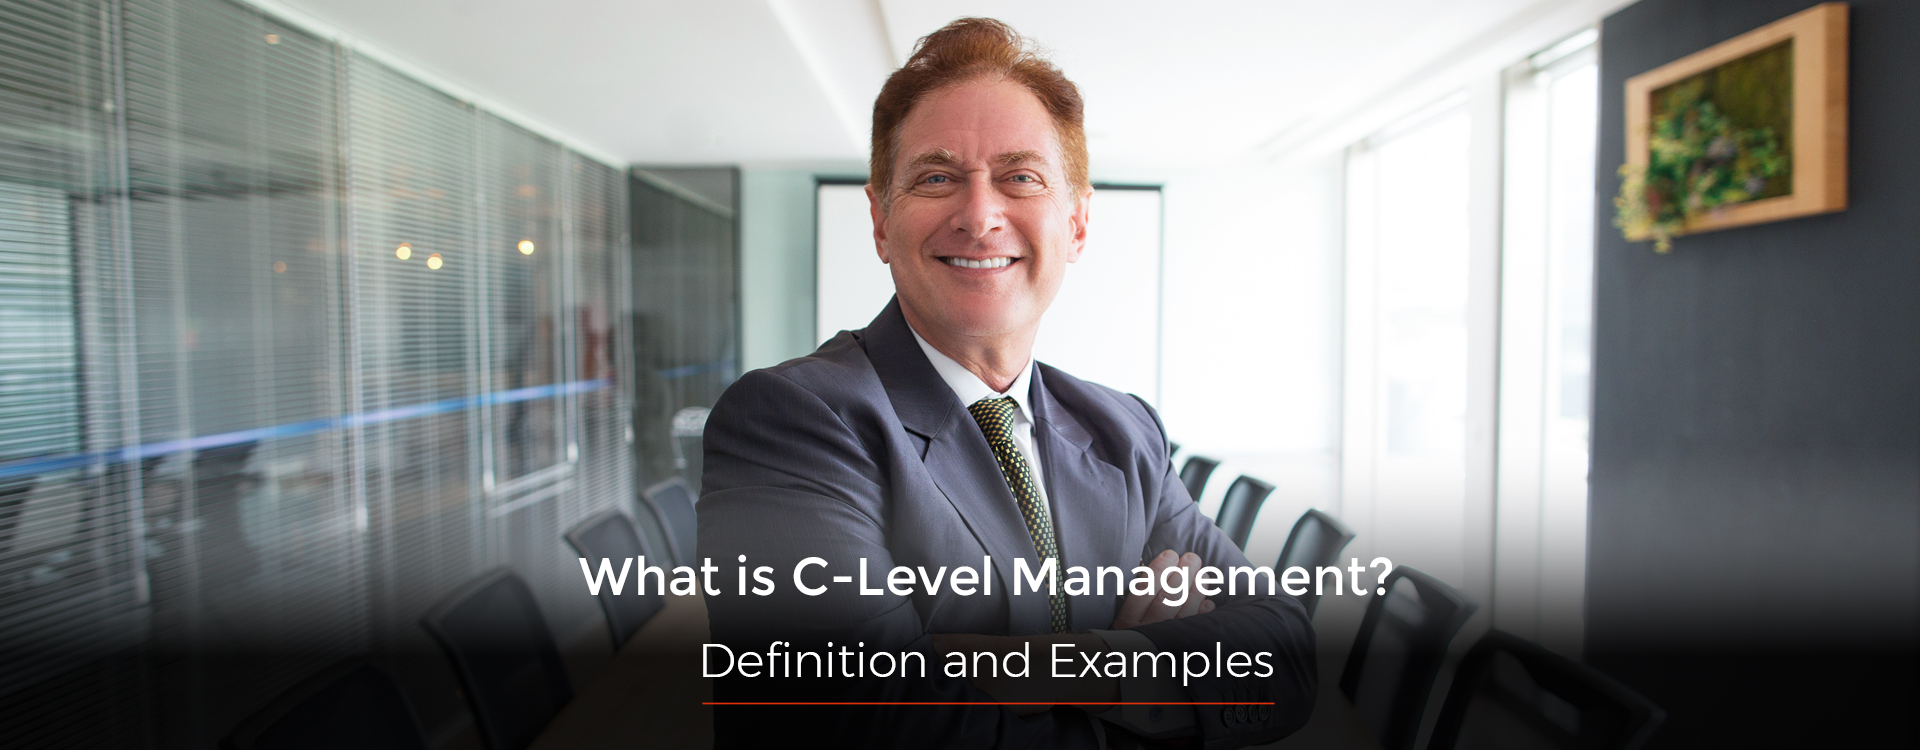 What is C-Level Management? Definition and Examples